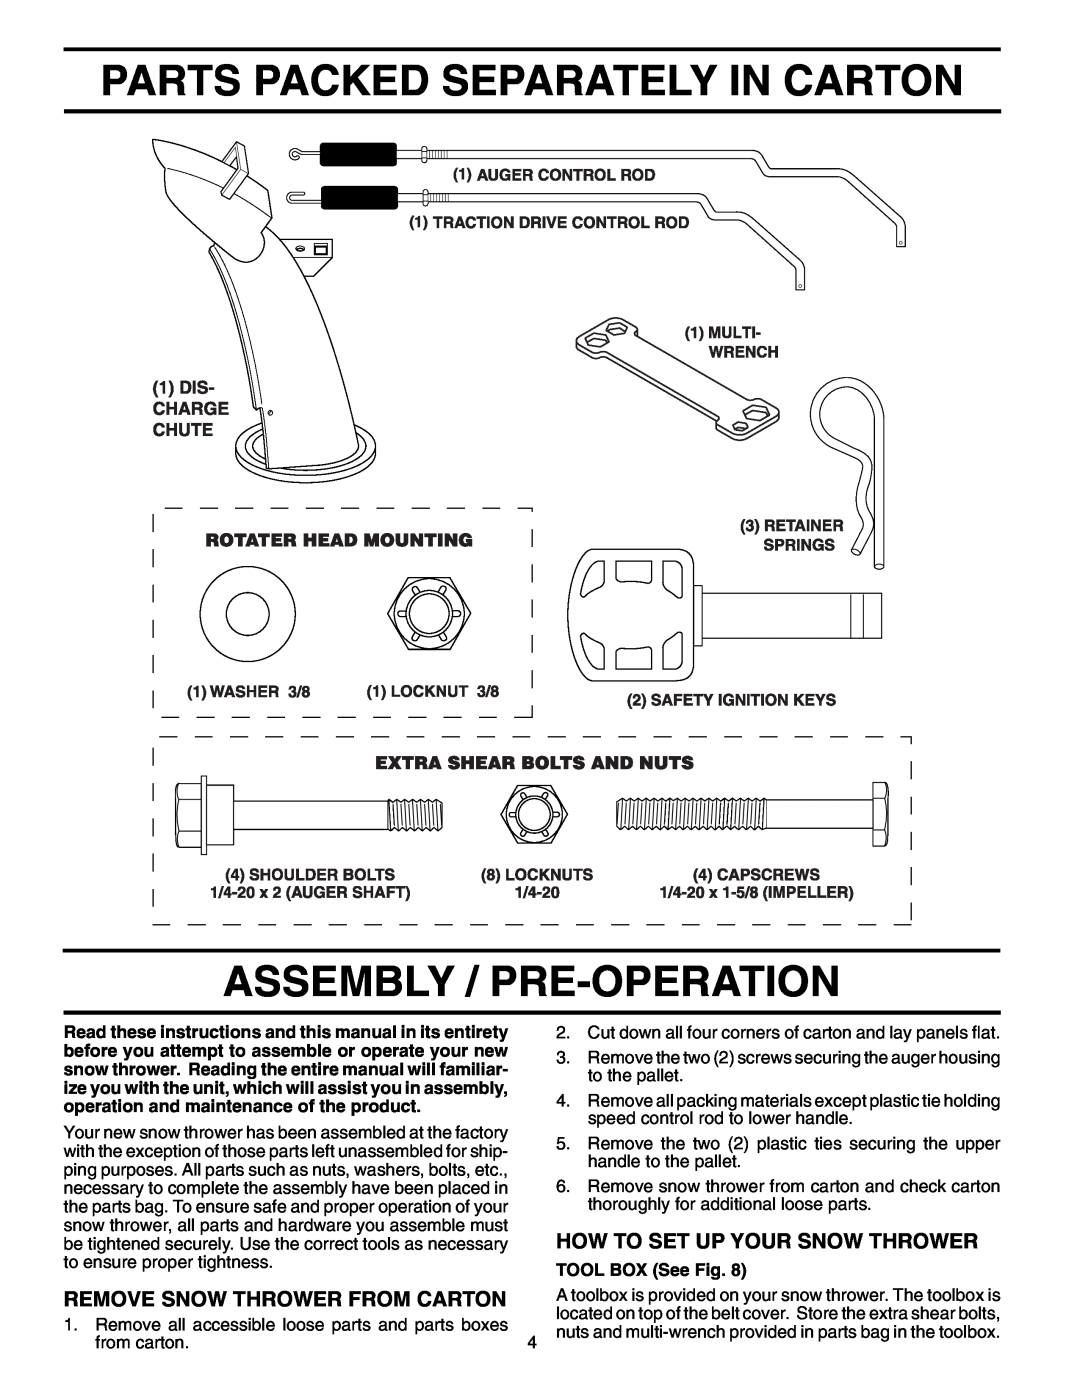 Poulan 199350 owner manual Parts Packed Separately In Carton Assembly / Pre-Operation, How To Set Up Your Snow Thrower 